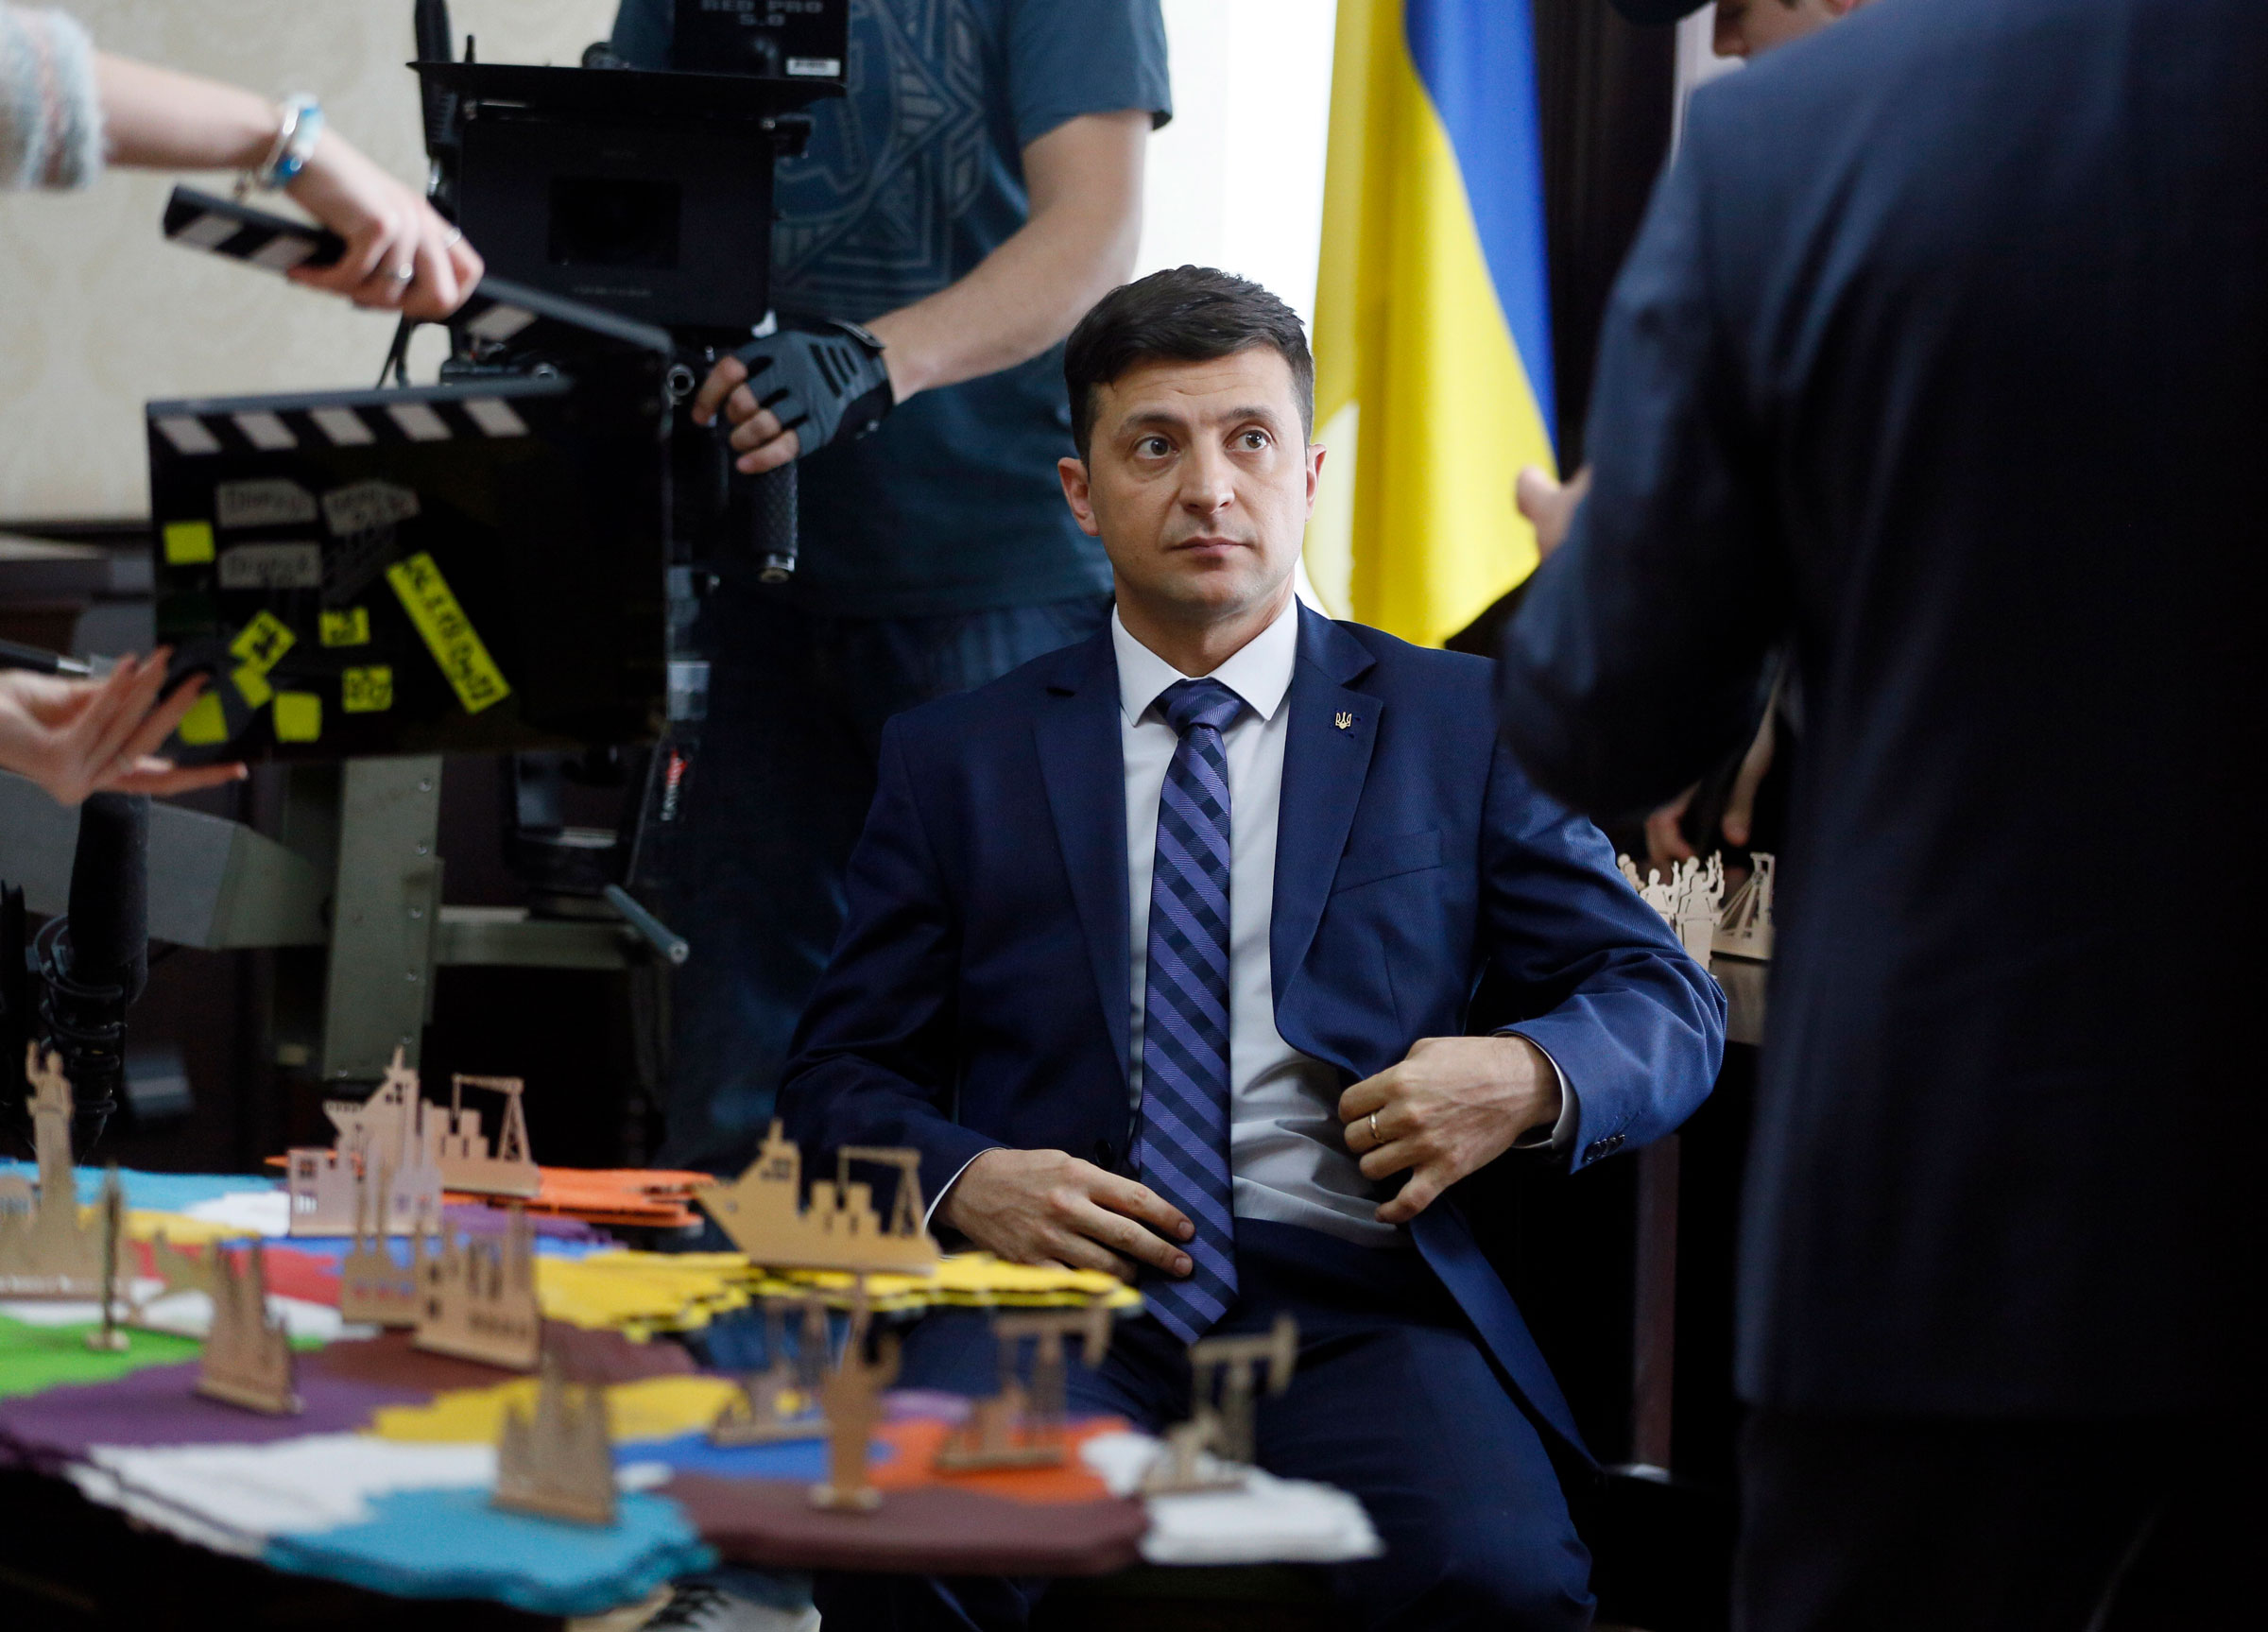 Zelensky on a movie set in 2019, a month before his election victory